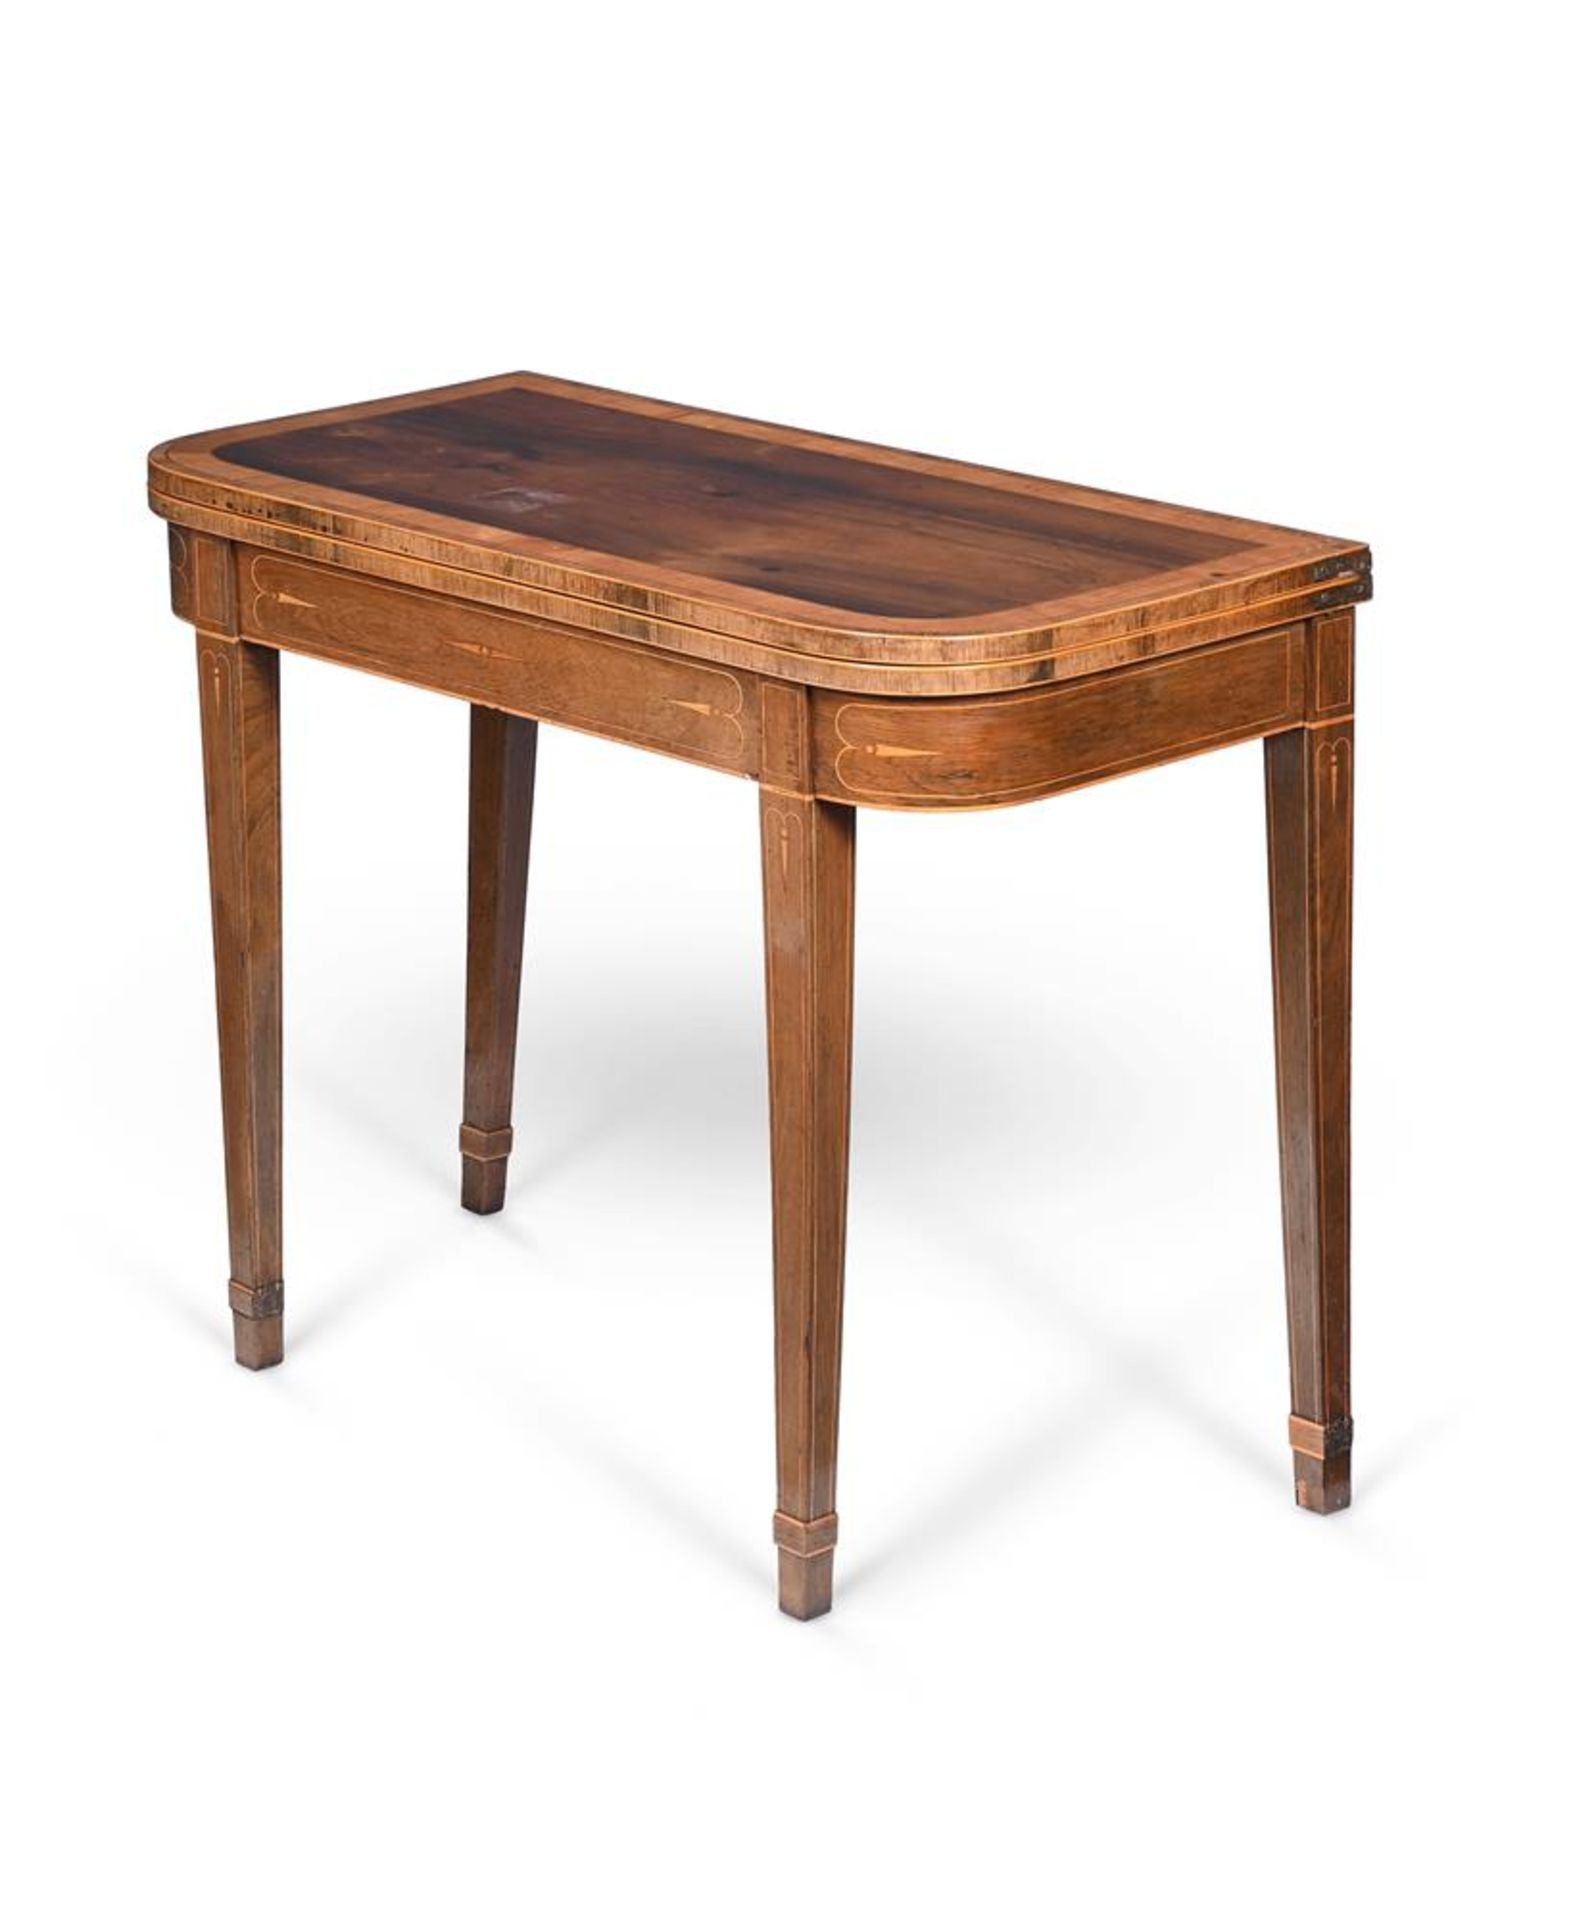 Y A PAIR OF GEORGE III ROSEWOOD AND SATINWOOD CROSSBANDED CARD TABLES, CIRCA 1790 - Image 3 of 8